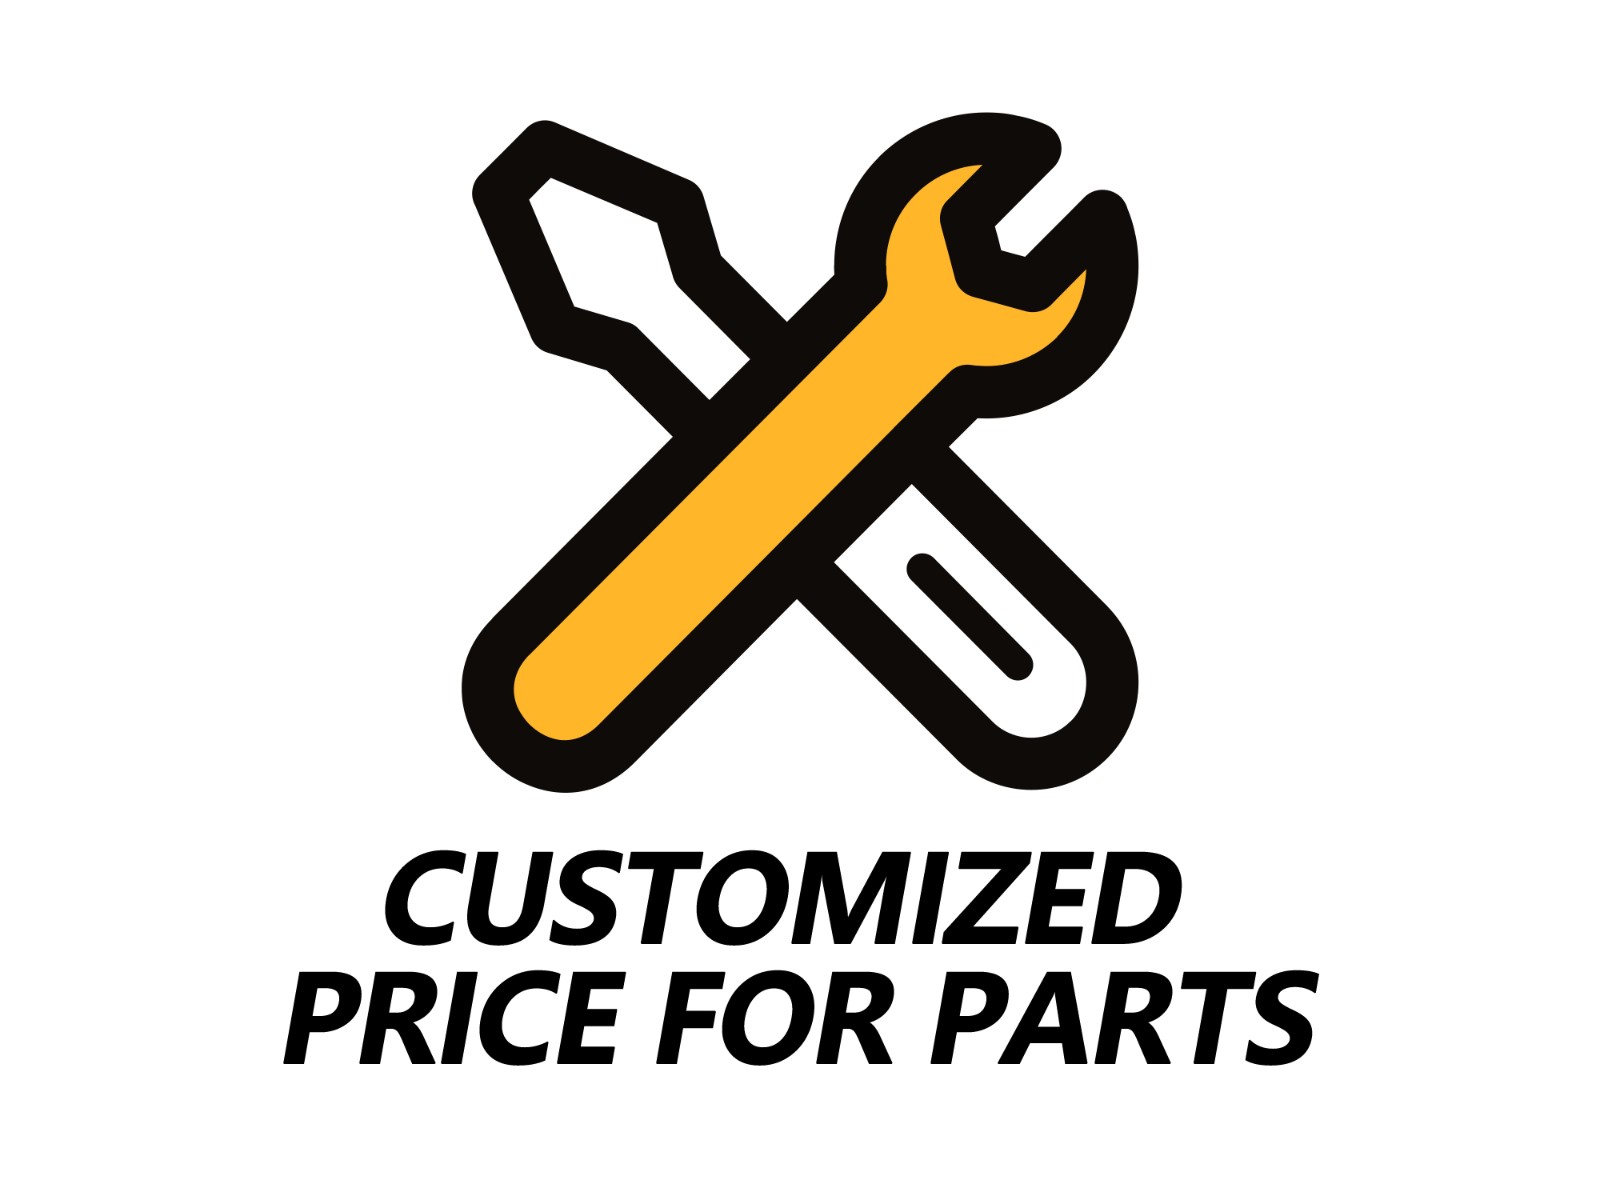 Customized price for parts